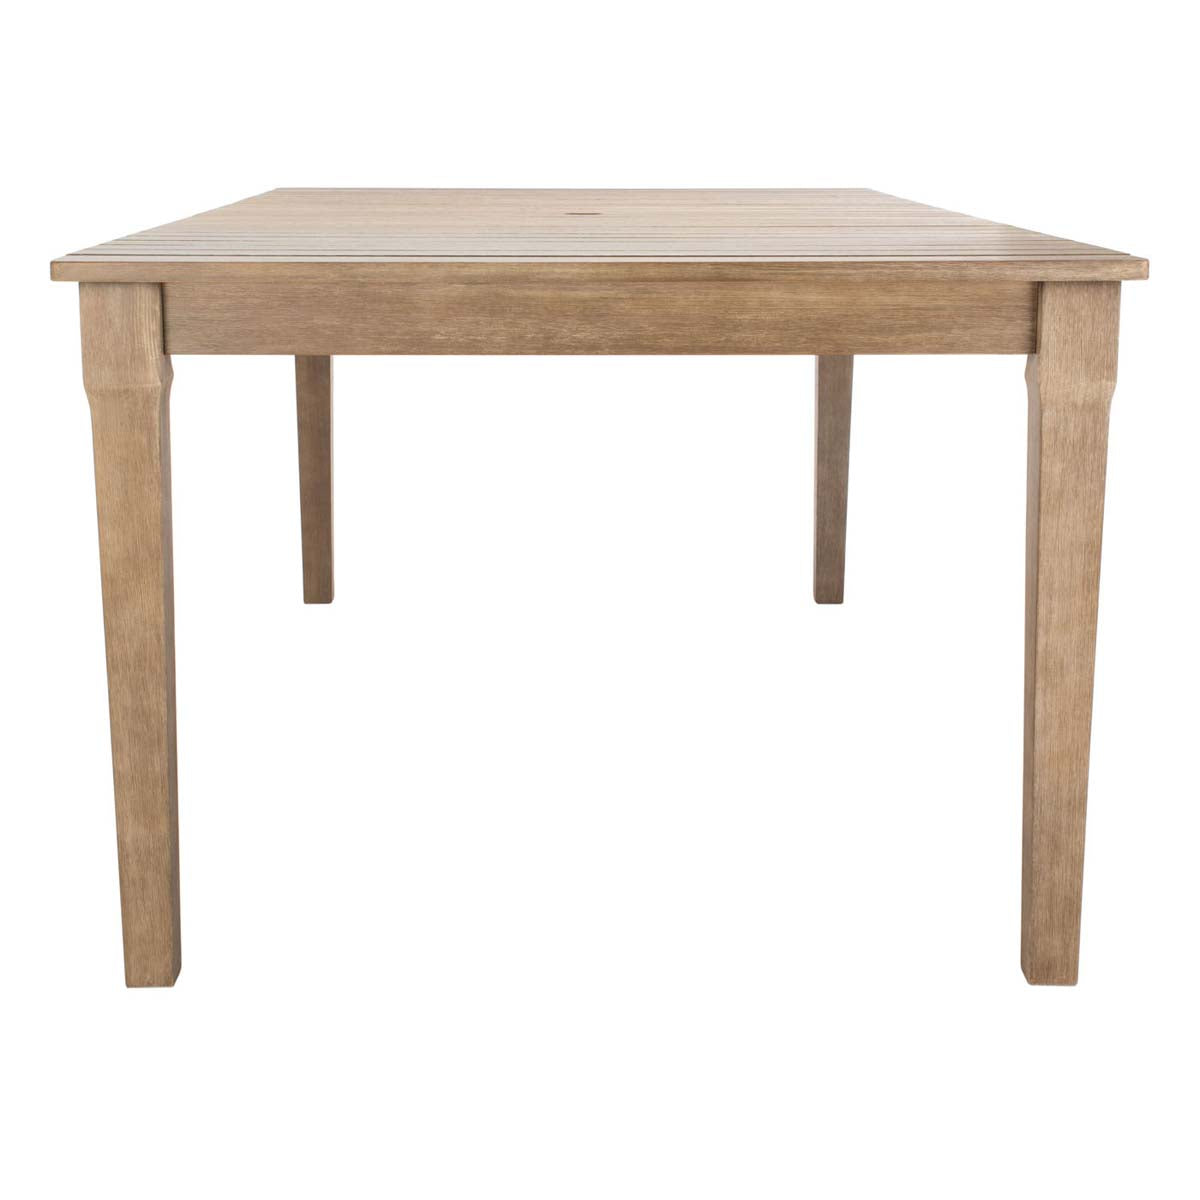 Safavieh Couture Dominica Wooden Outdoor Dining Table - Natural